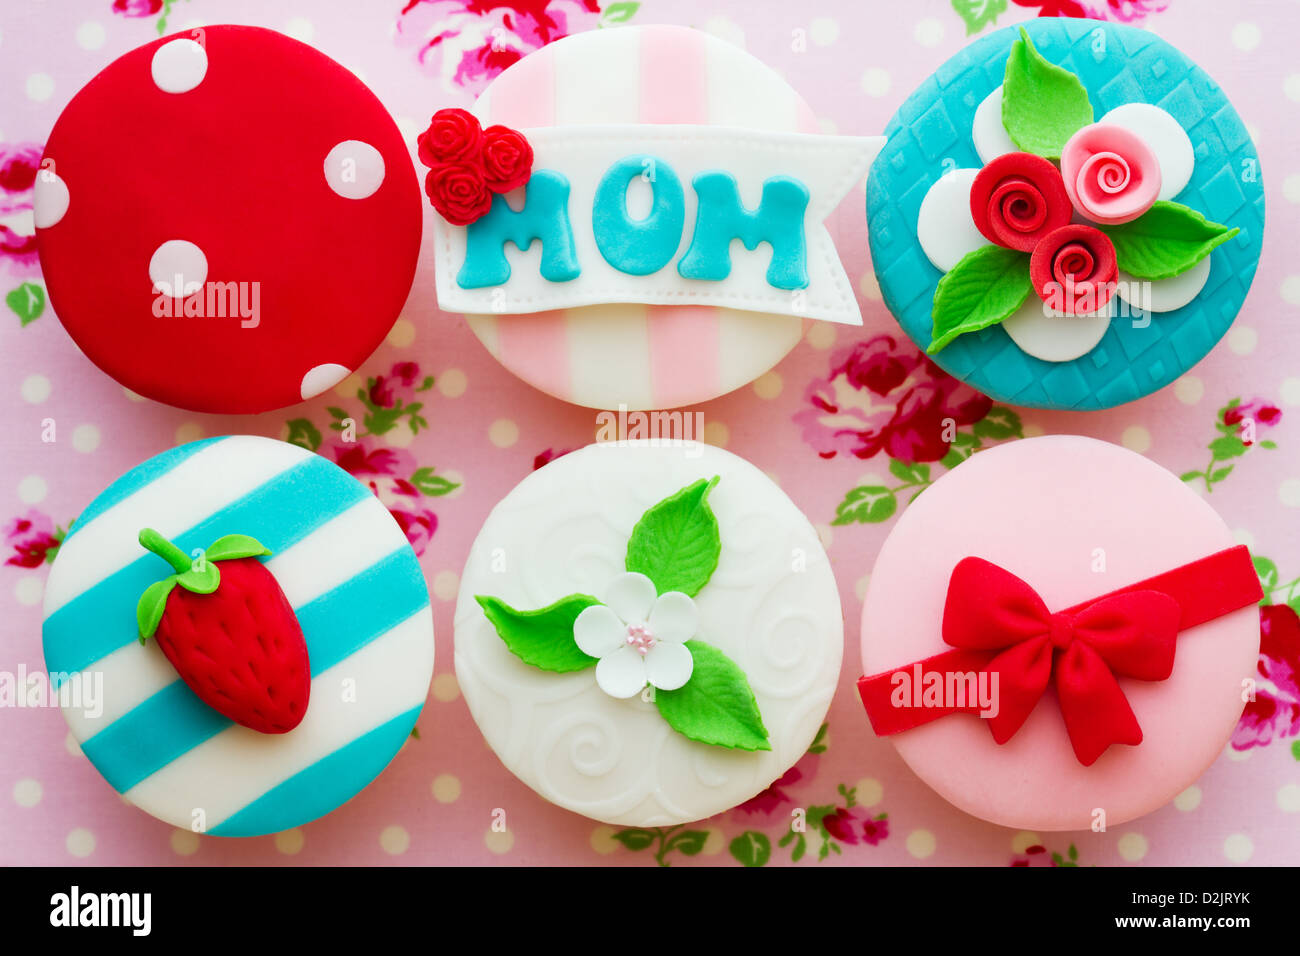 Mother's day cupcakes Stock Photo